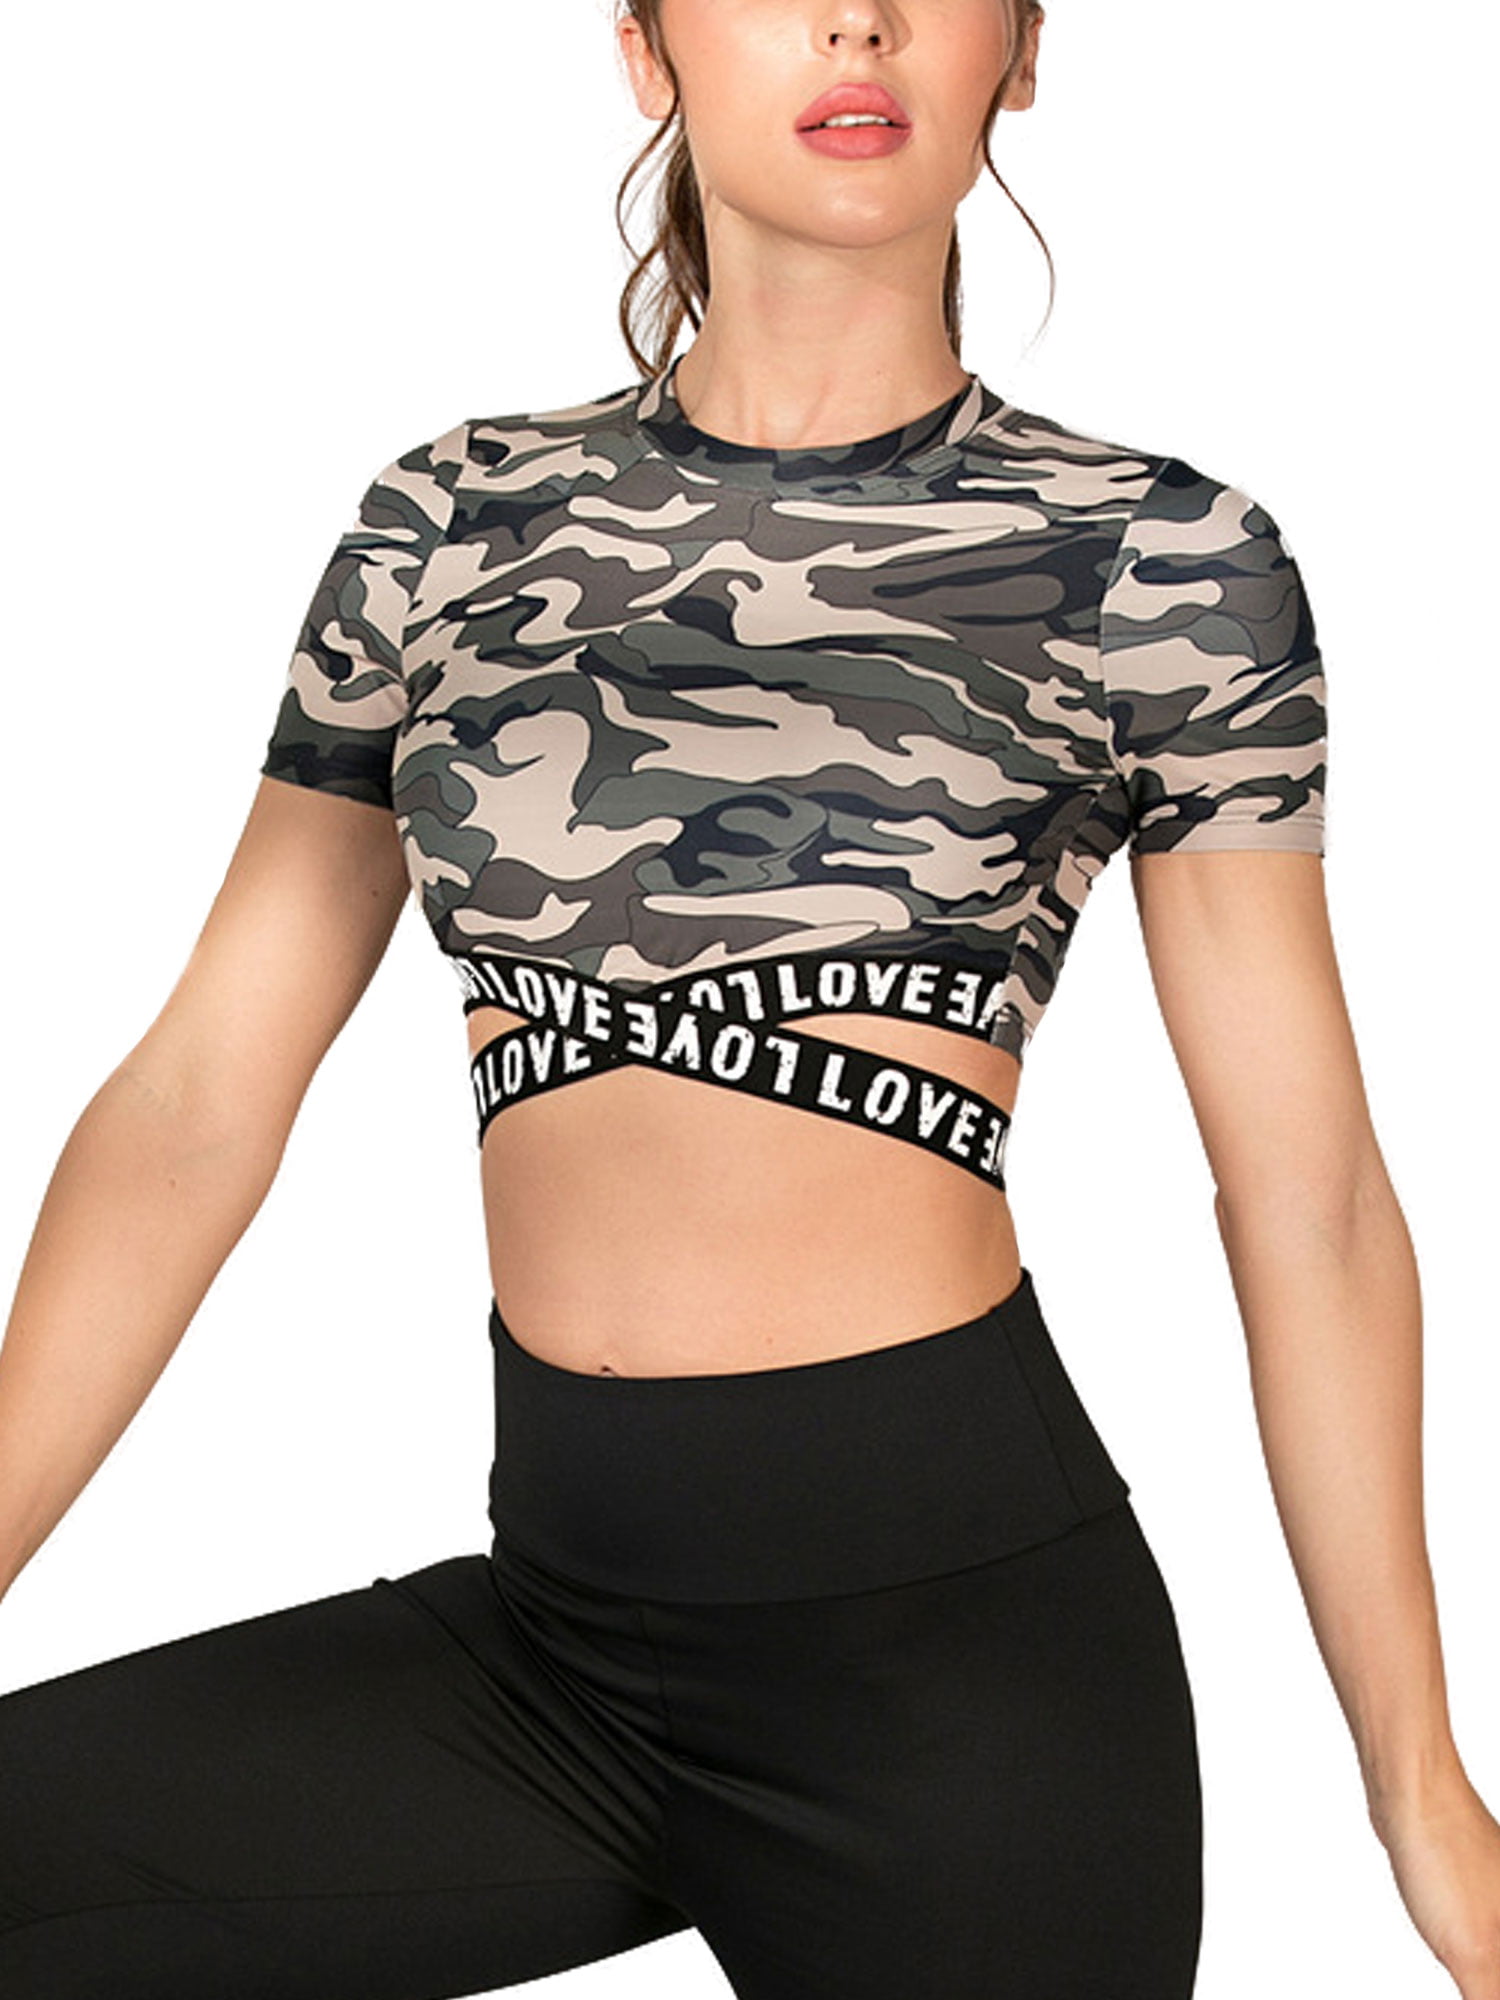 Ladies Sports Yoga Crop Top Long Sleeve Gym Workout Running Fitness Shirts Vest